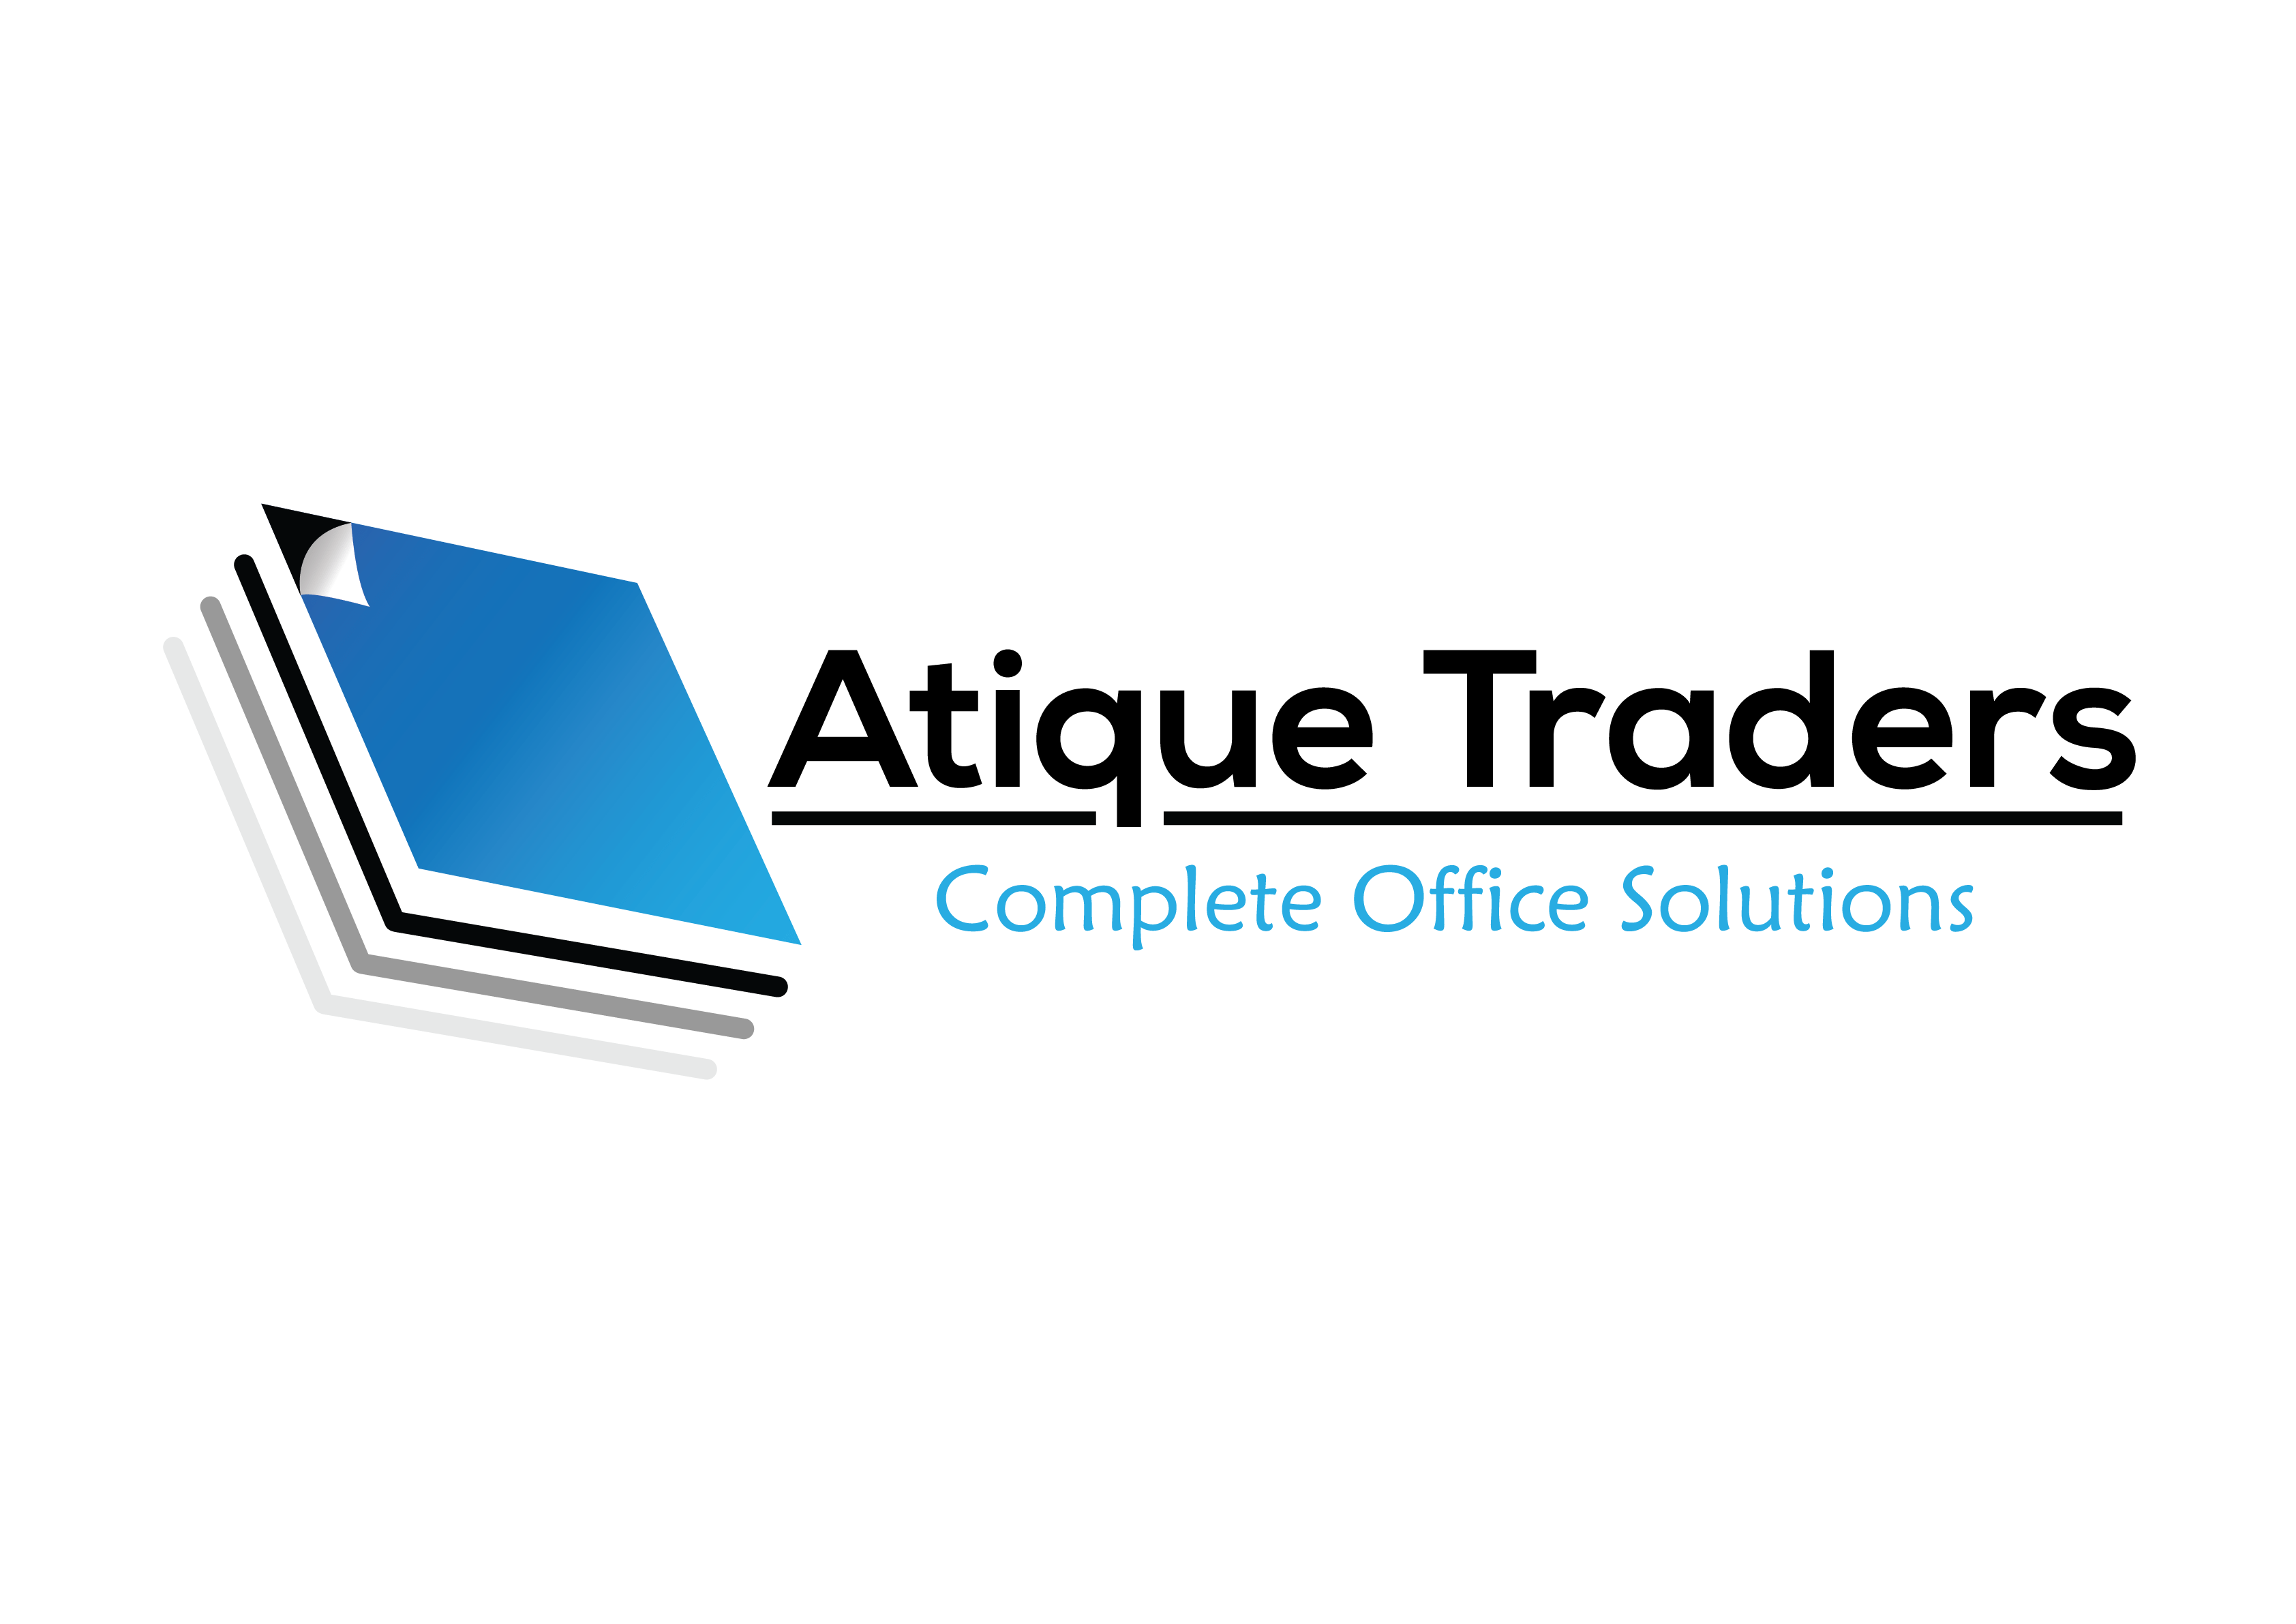 https://www.pakpositions.com/company/atique-traders